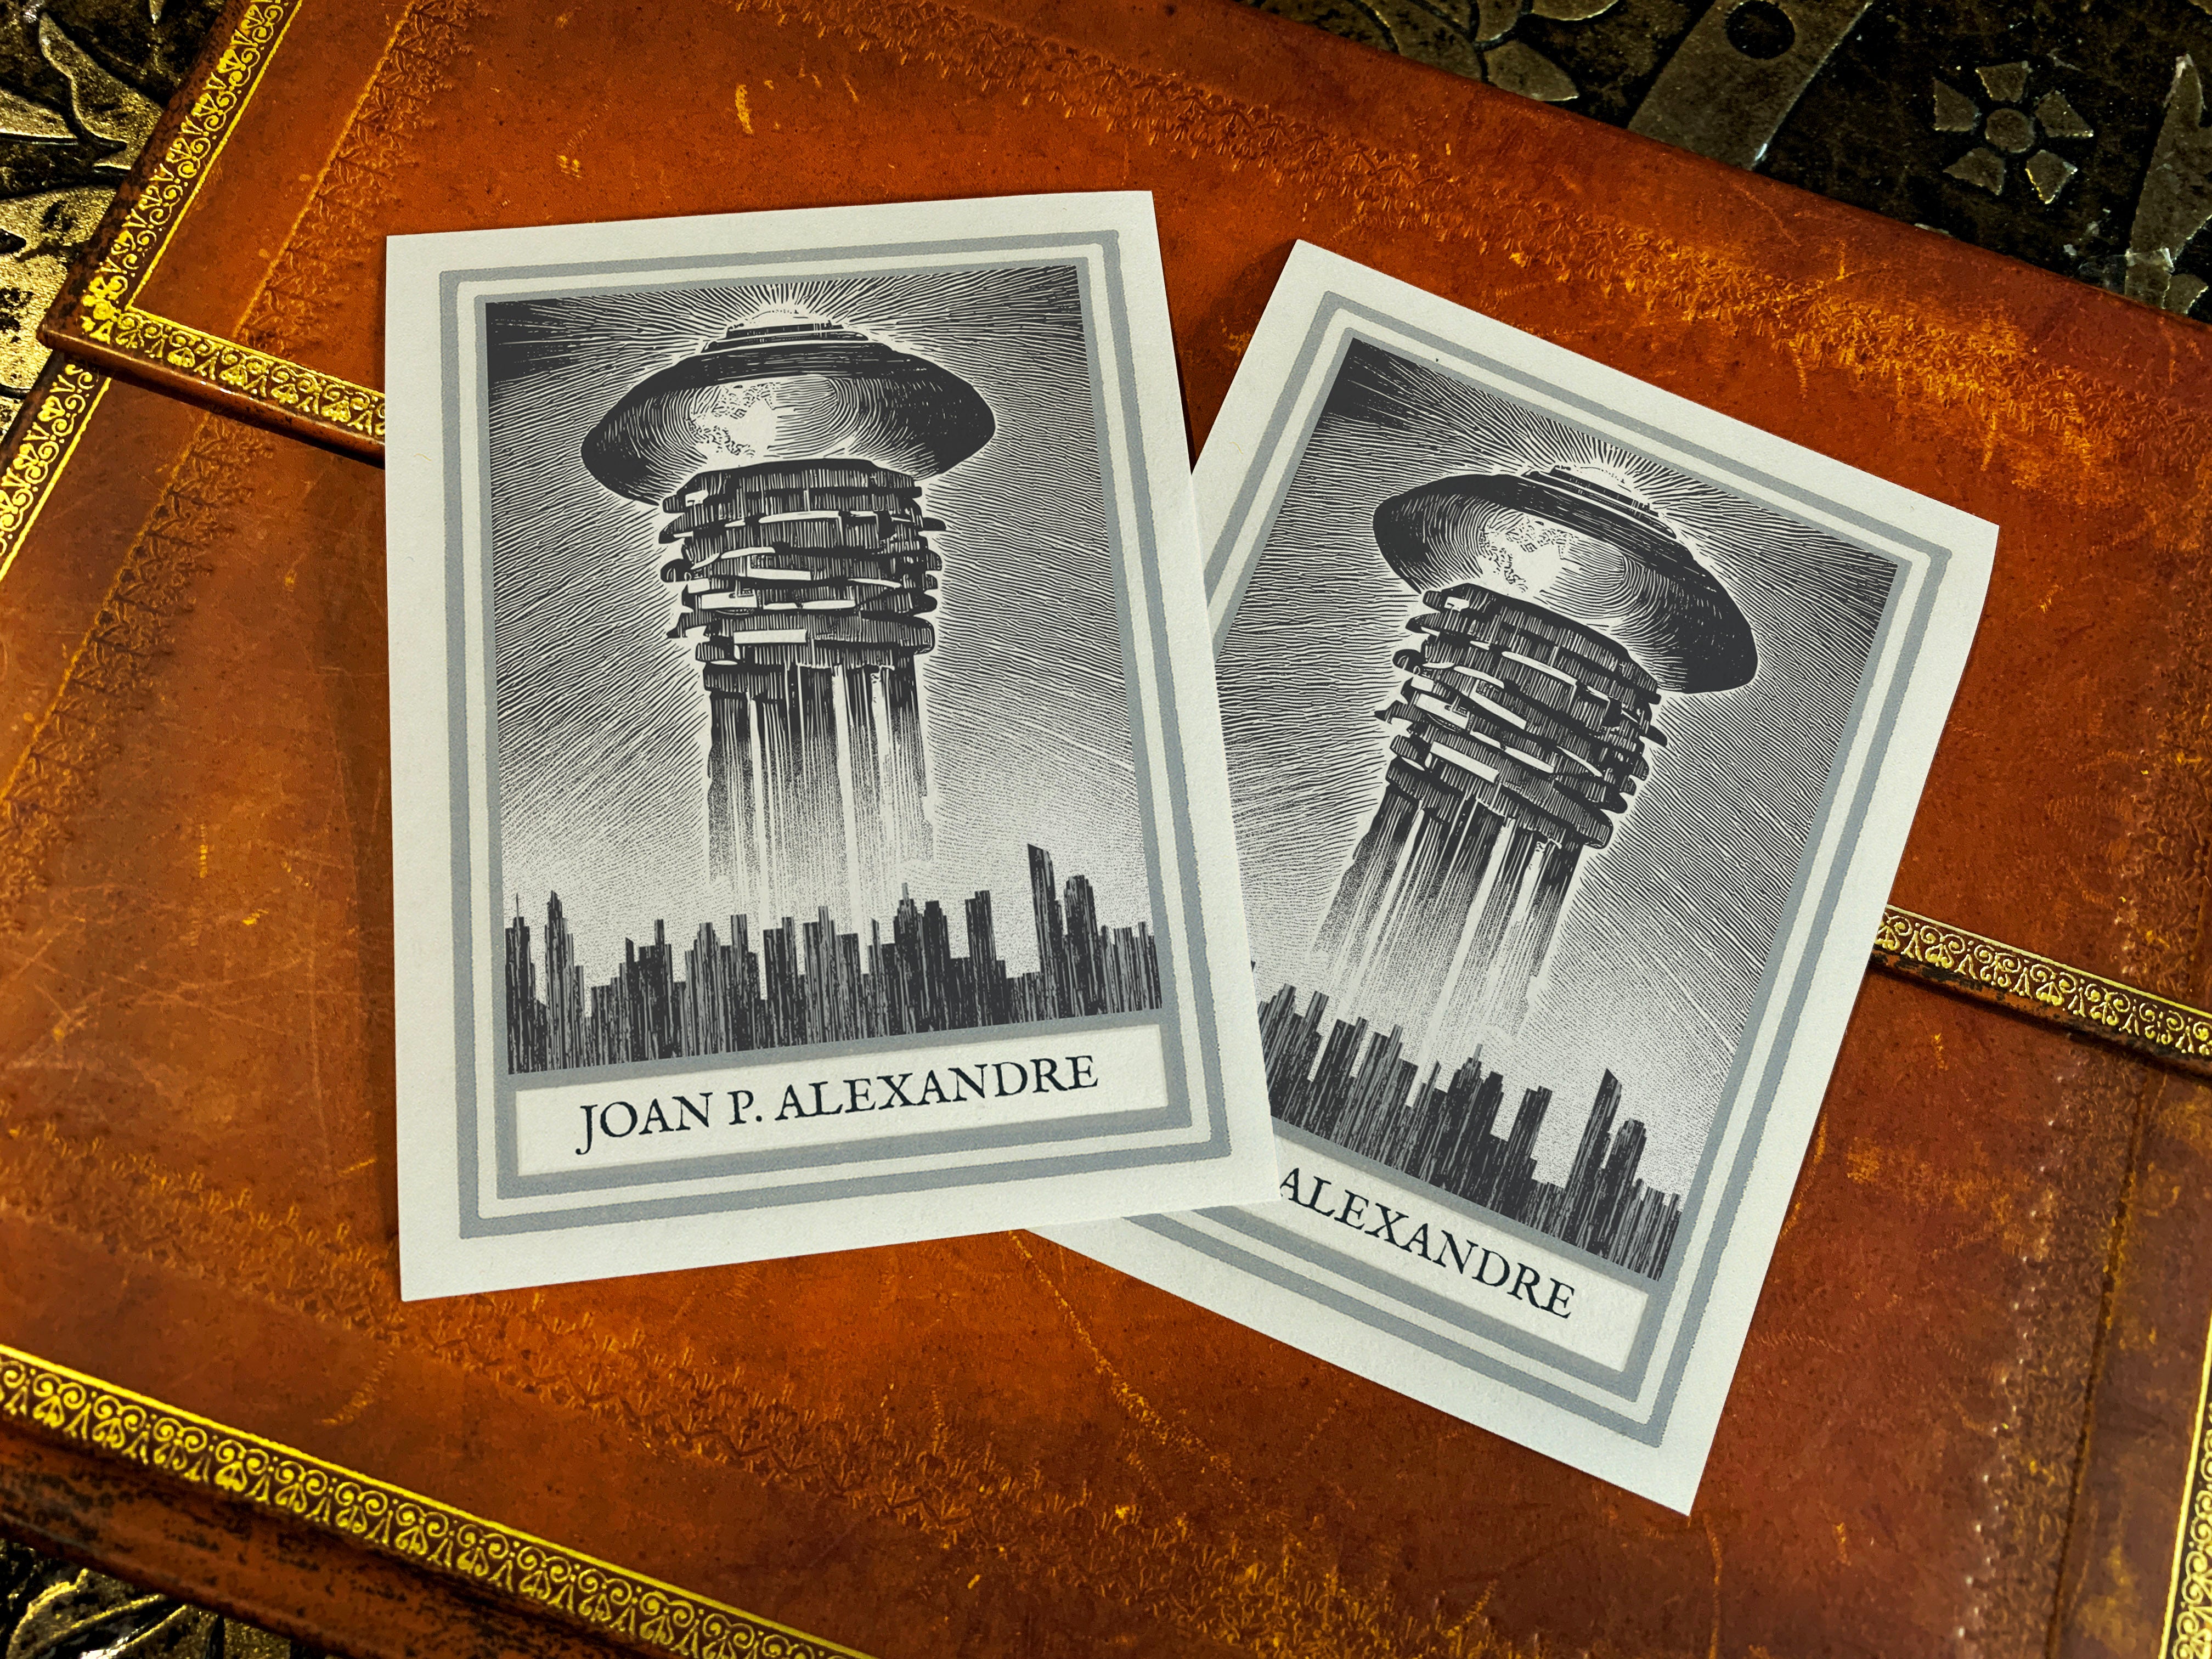 Knowledge Mothership, UFO Sci-fi Personalized Ex-Libris Bookplates, Crafted on Traditional Gummed Paper, 3in x 4in, Set of 30